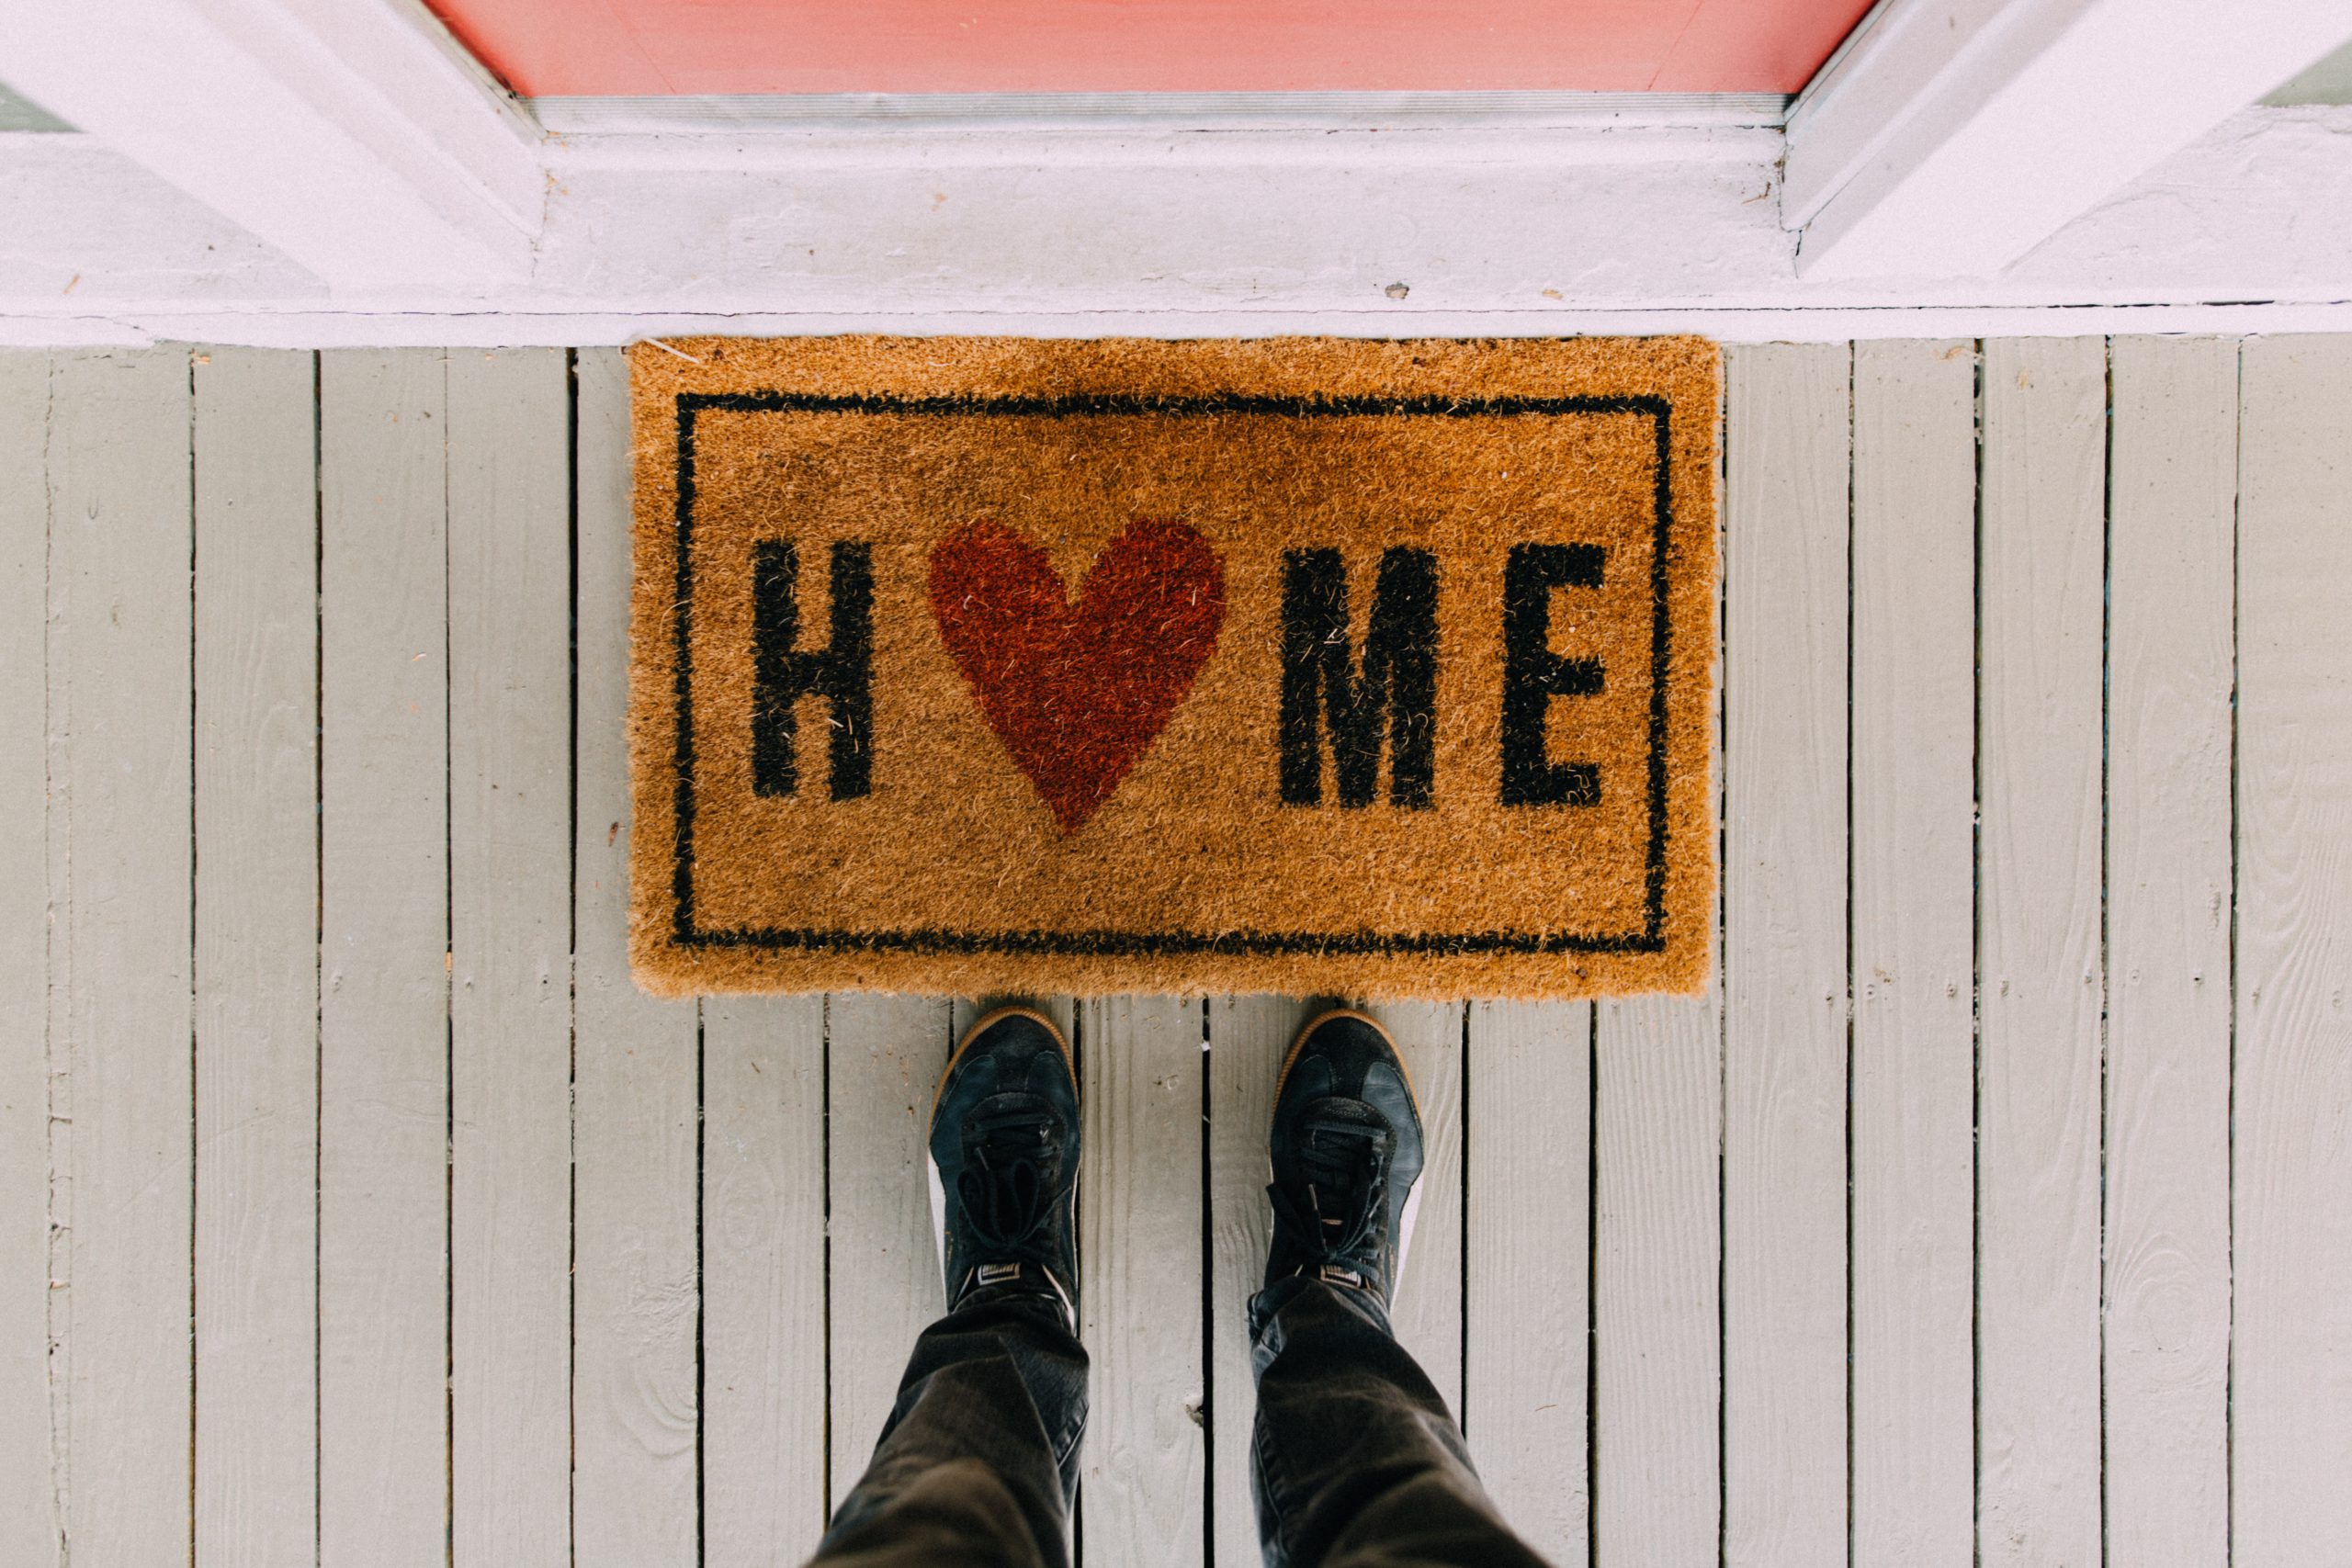 Floor mat with home written on it but a heart instead of an o with feet visible